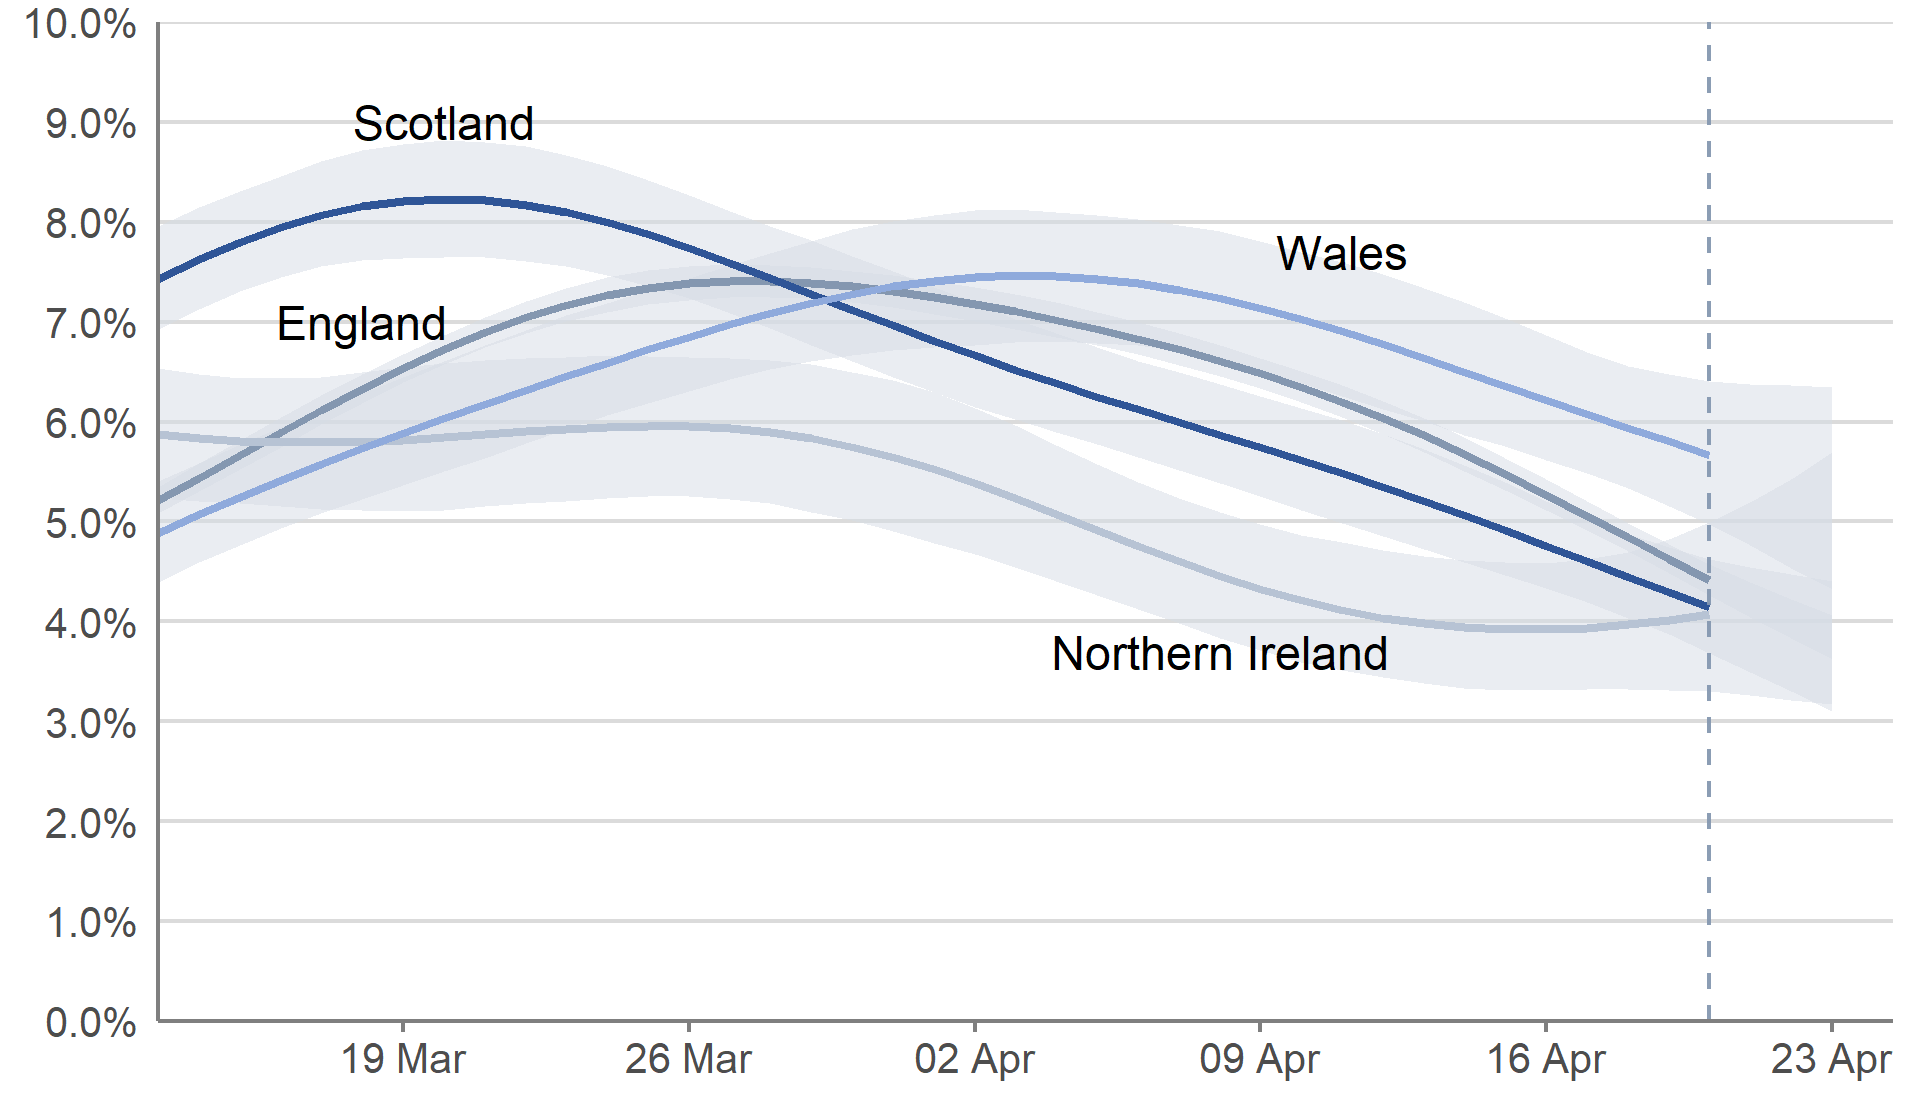 In the most recent week (17 to 23 April 2022), the percentage of people testing positive for COVID-19 continued to decrease in England, Wales and Scotland. In Northern Ireland, the percentage of people testing positive decreased over the most recent two weeks, but the trend was uncertain in the most recent week.